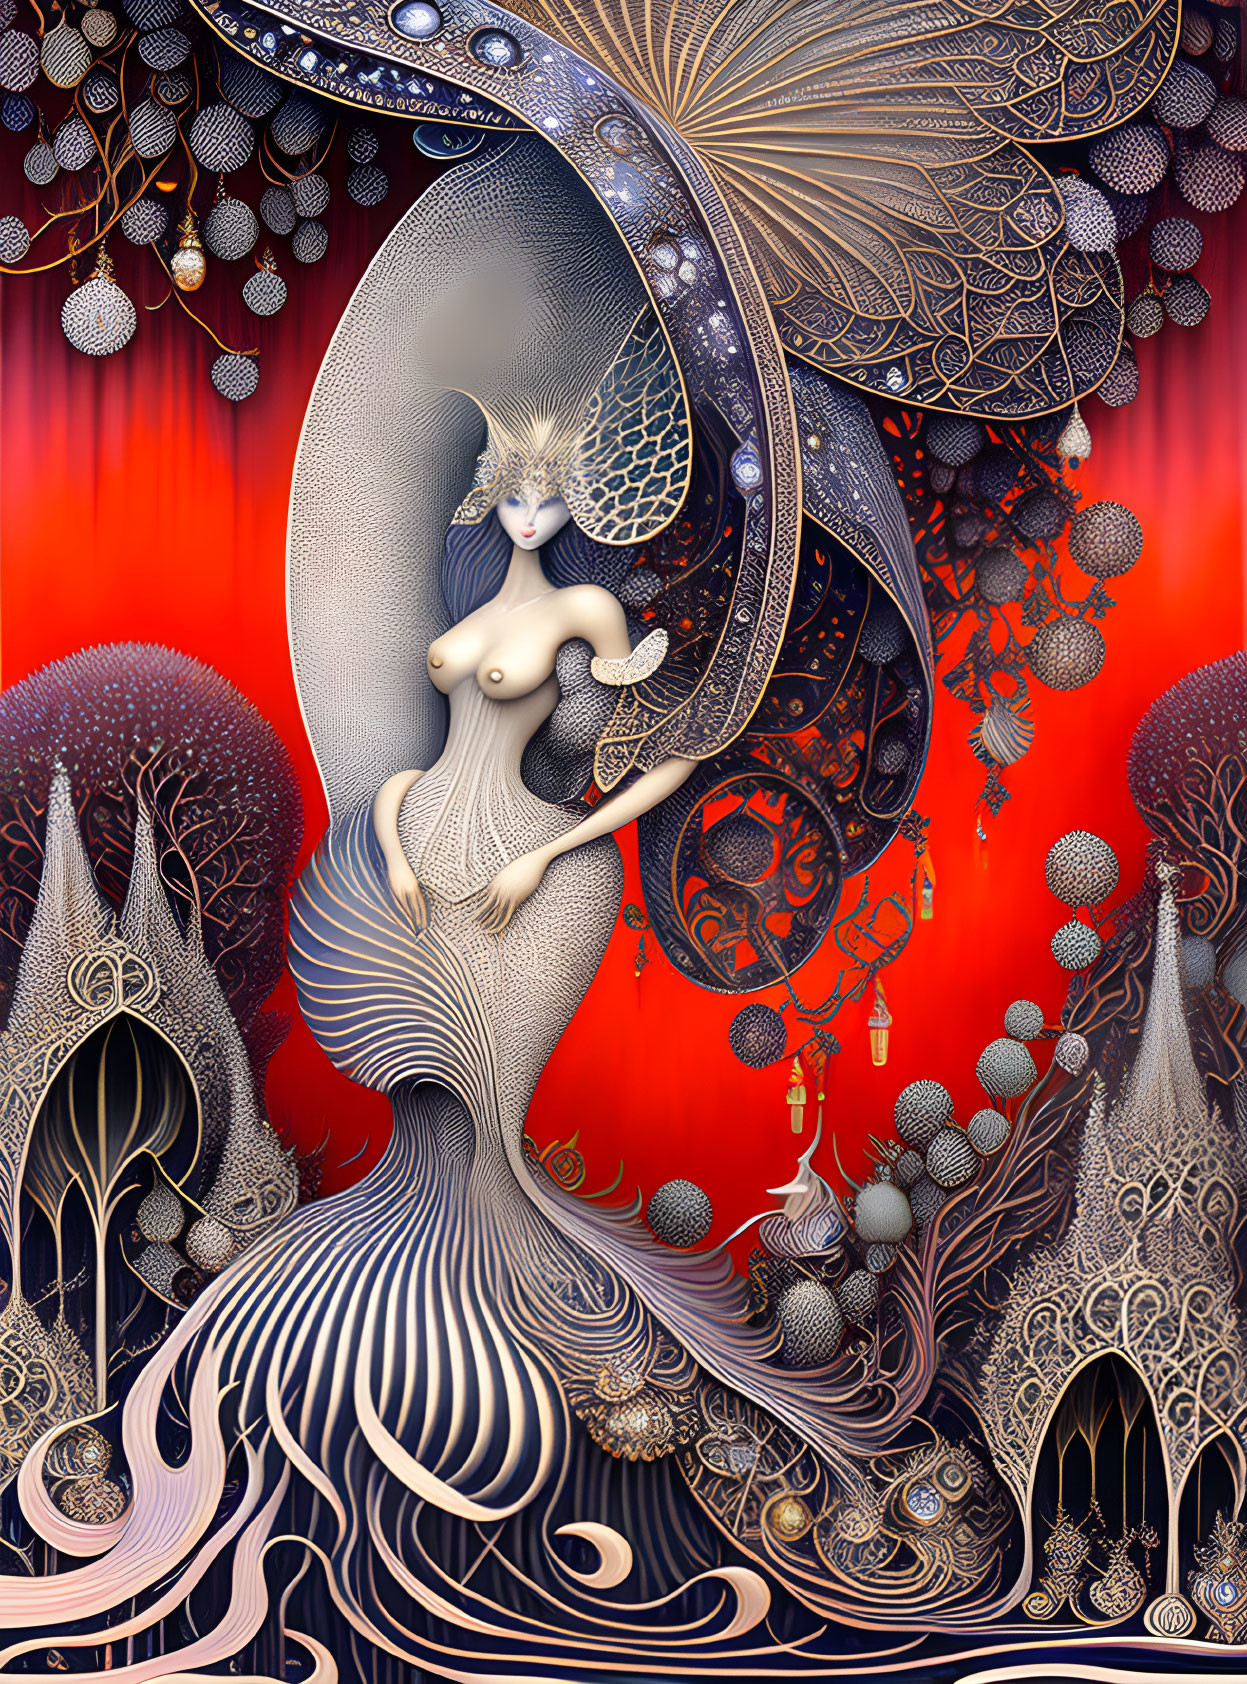 Intricately designed surreal artwork with pale female figure on vibrant red background